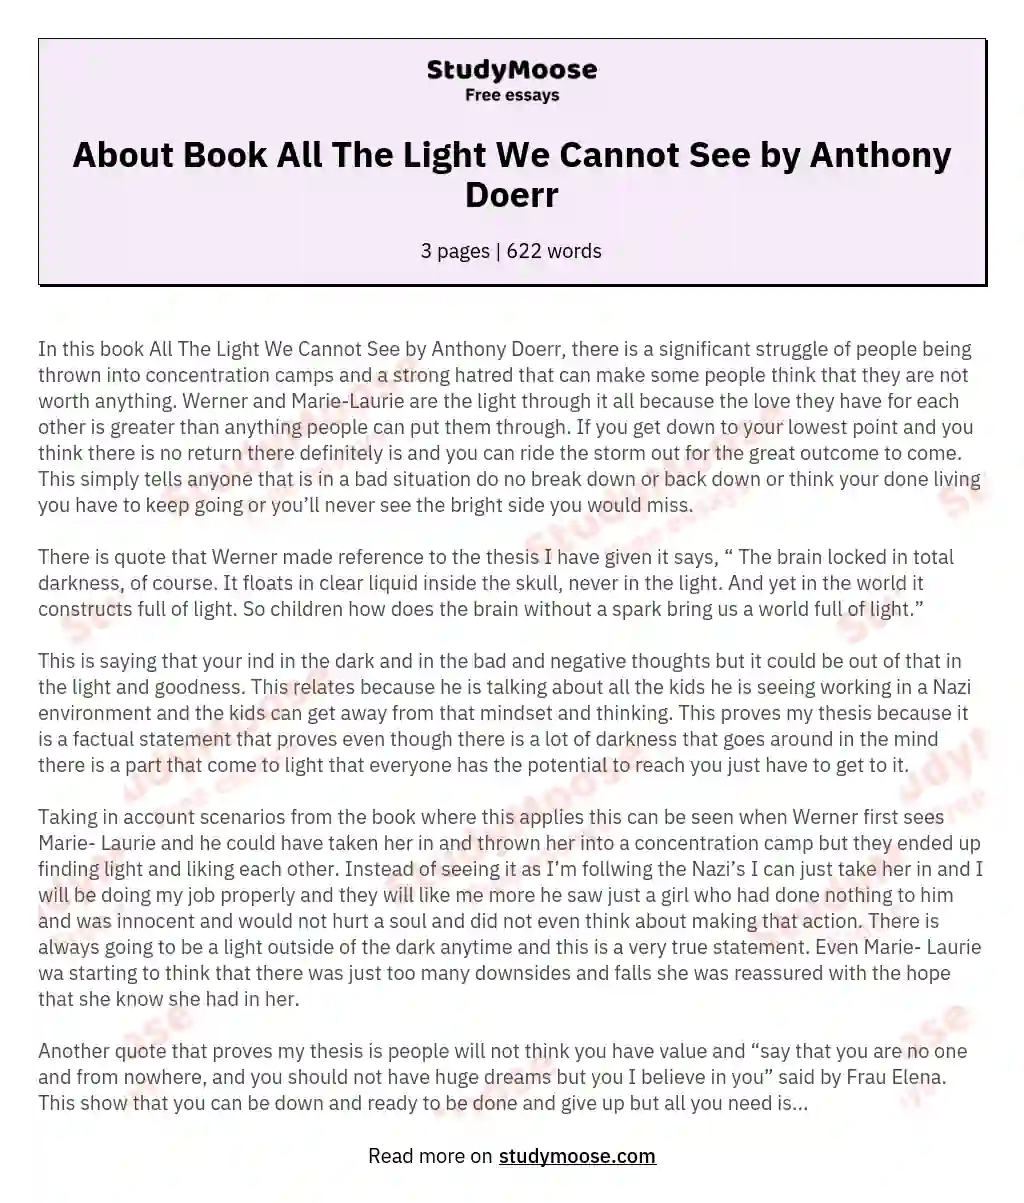 About Book All The Light We Cannot See by Anthony Doerr essay